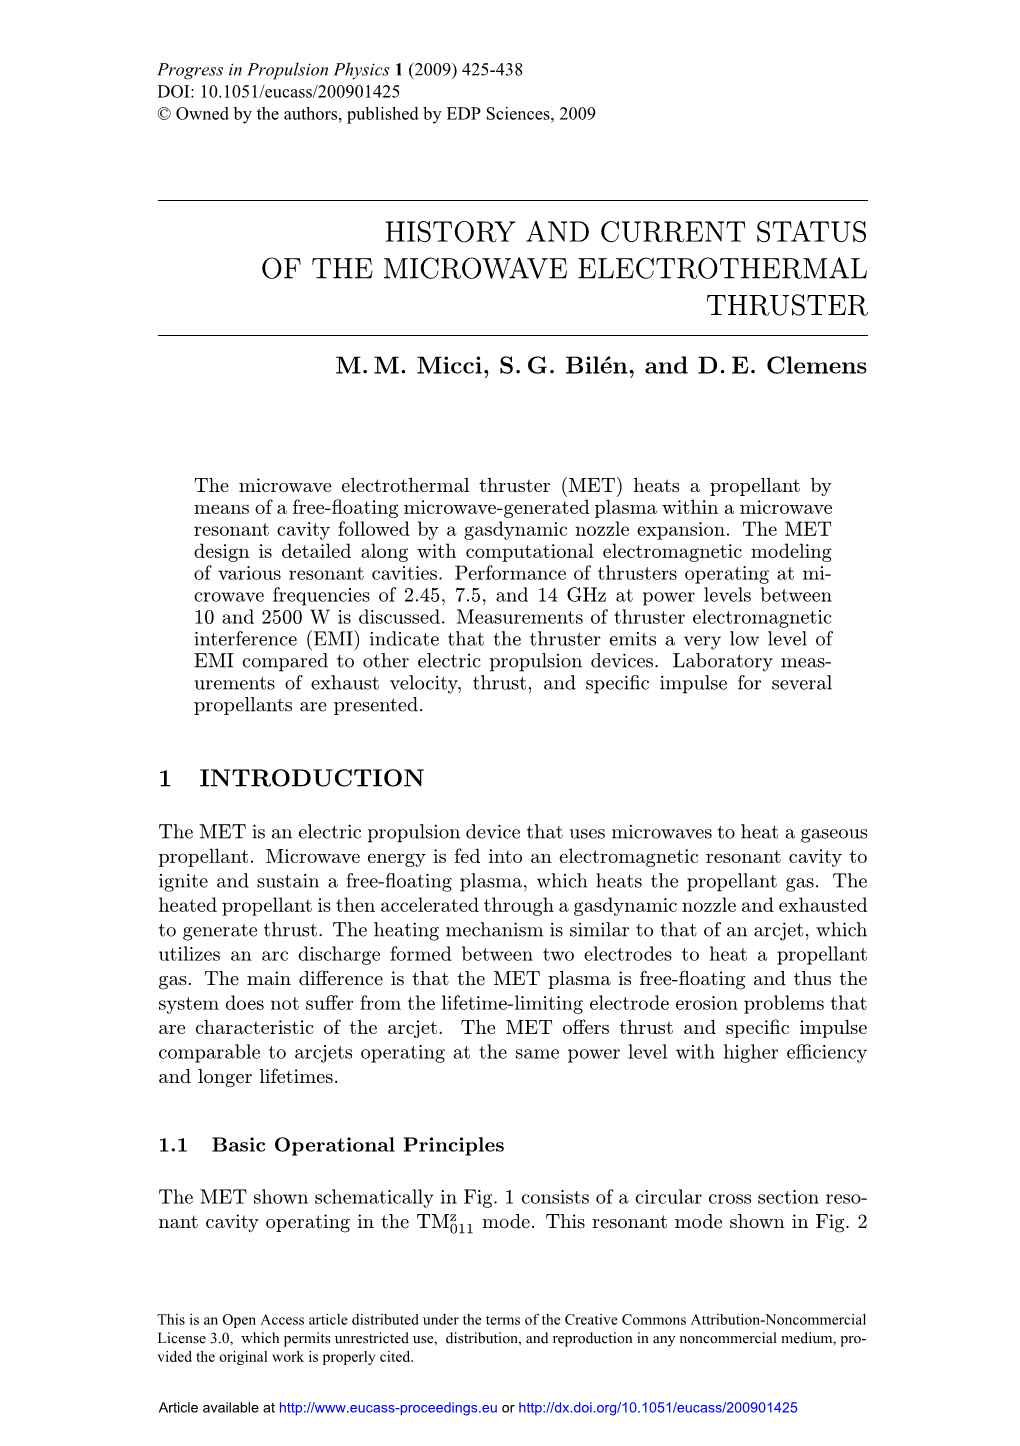 History and Current Status of the Microwave Electrothermal Thruster